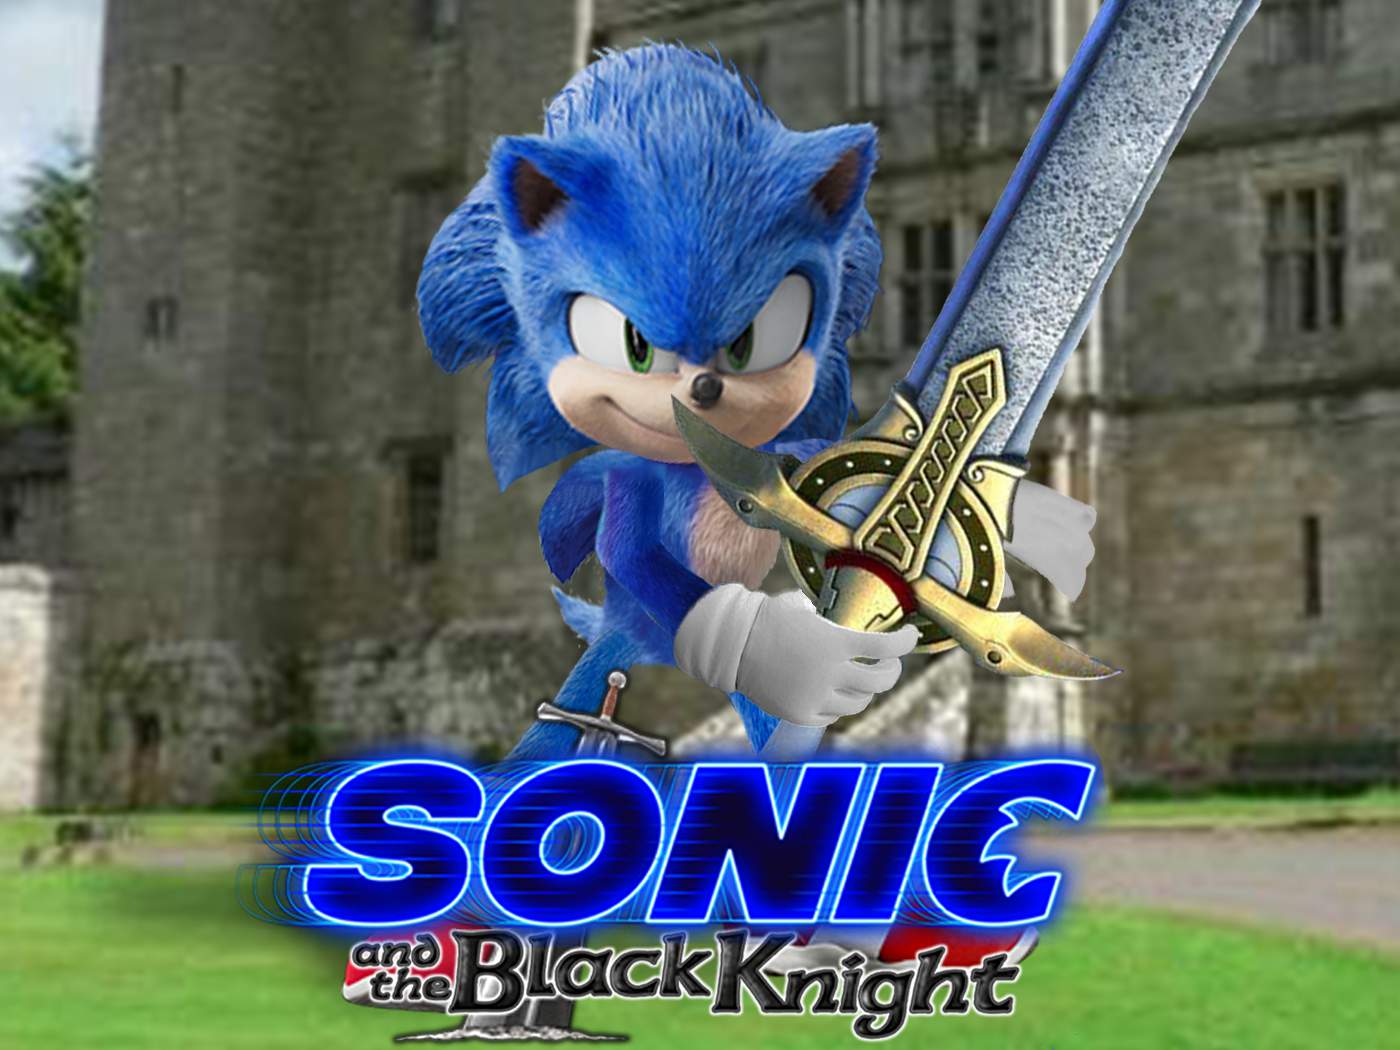 Sonic and the Black Knight Movie Poster. Sonic the Hedgehog! Amino